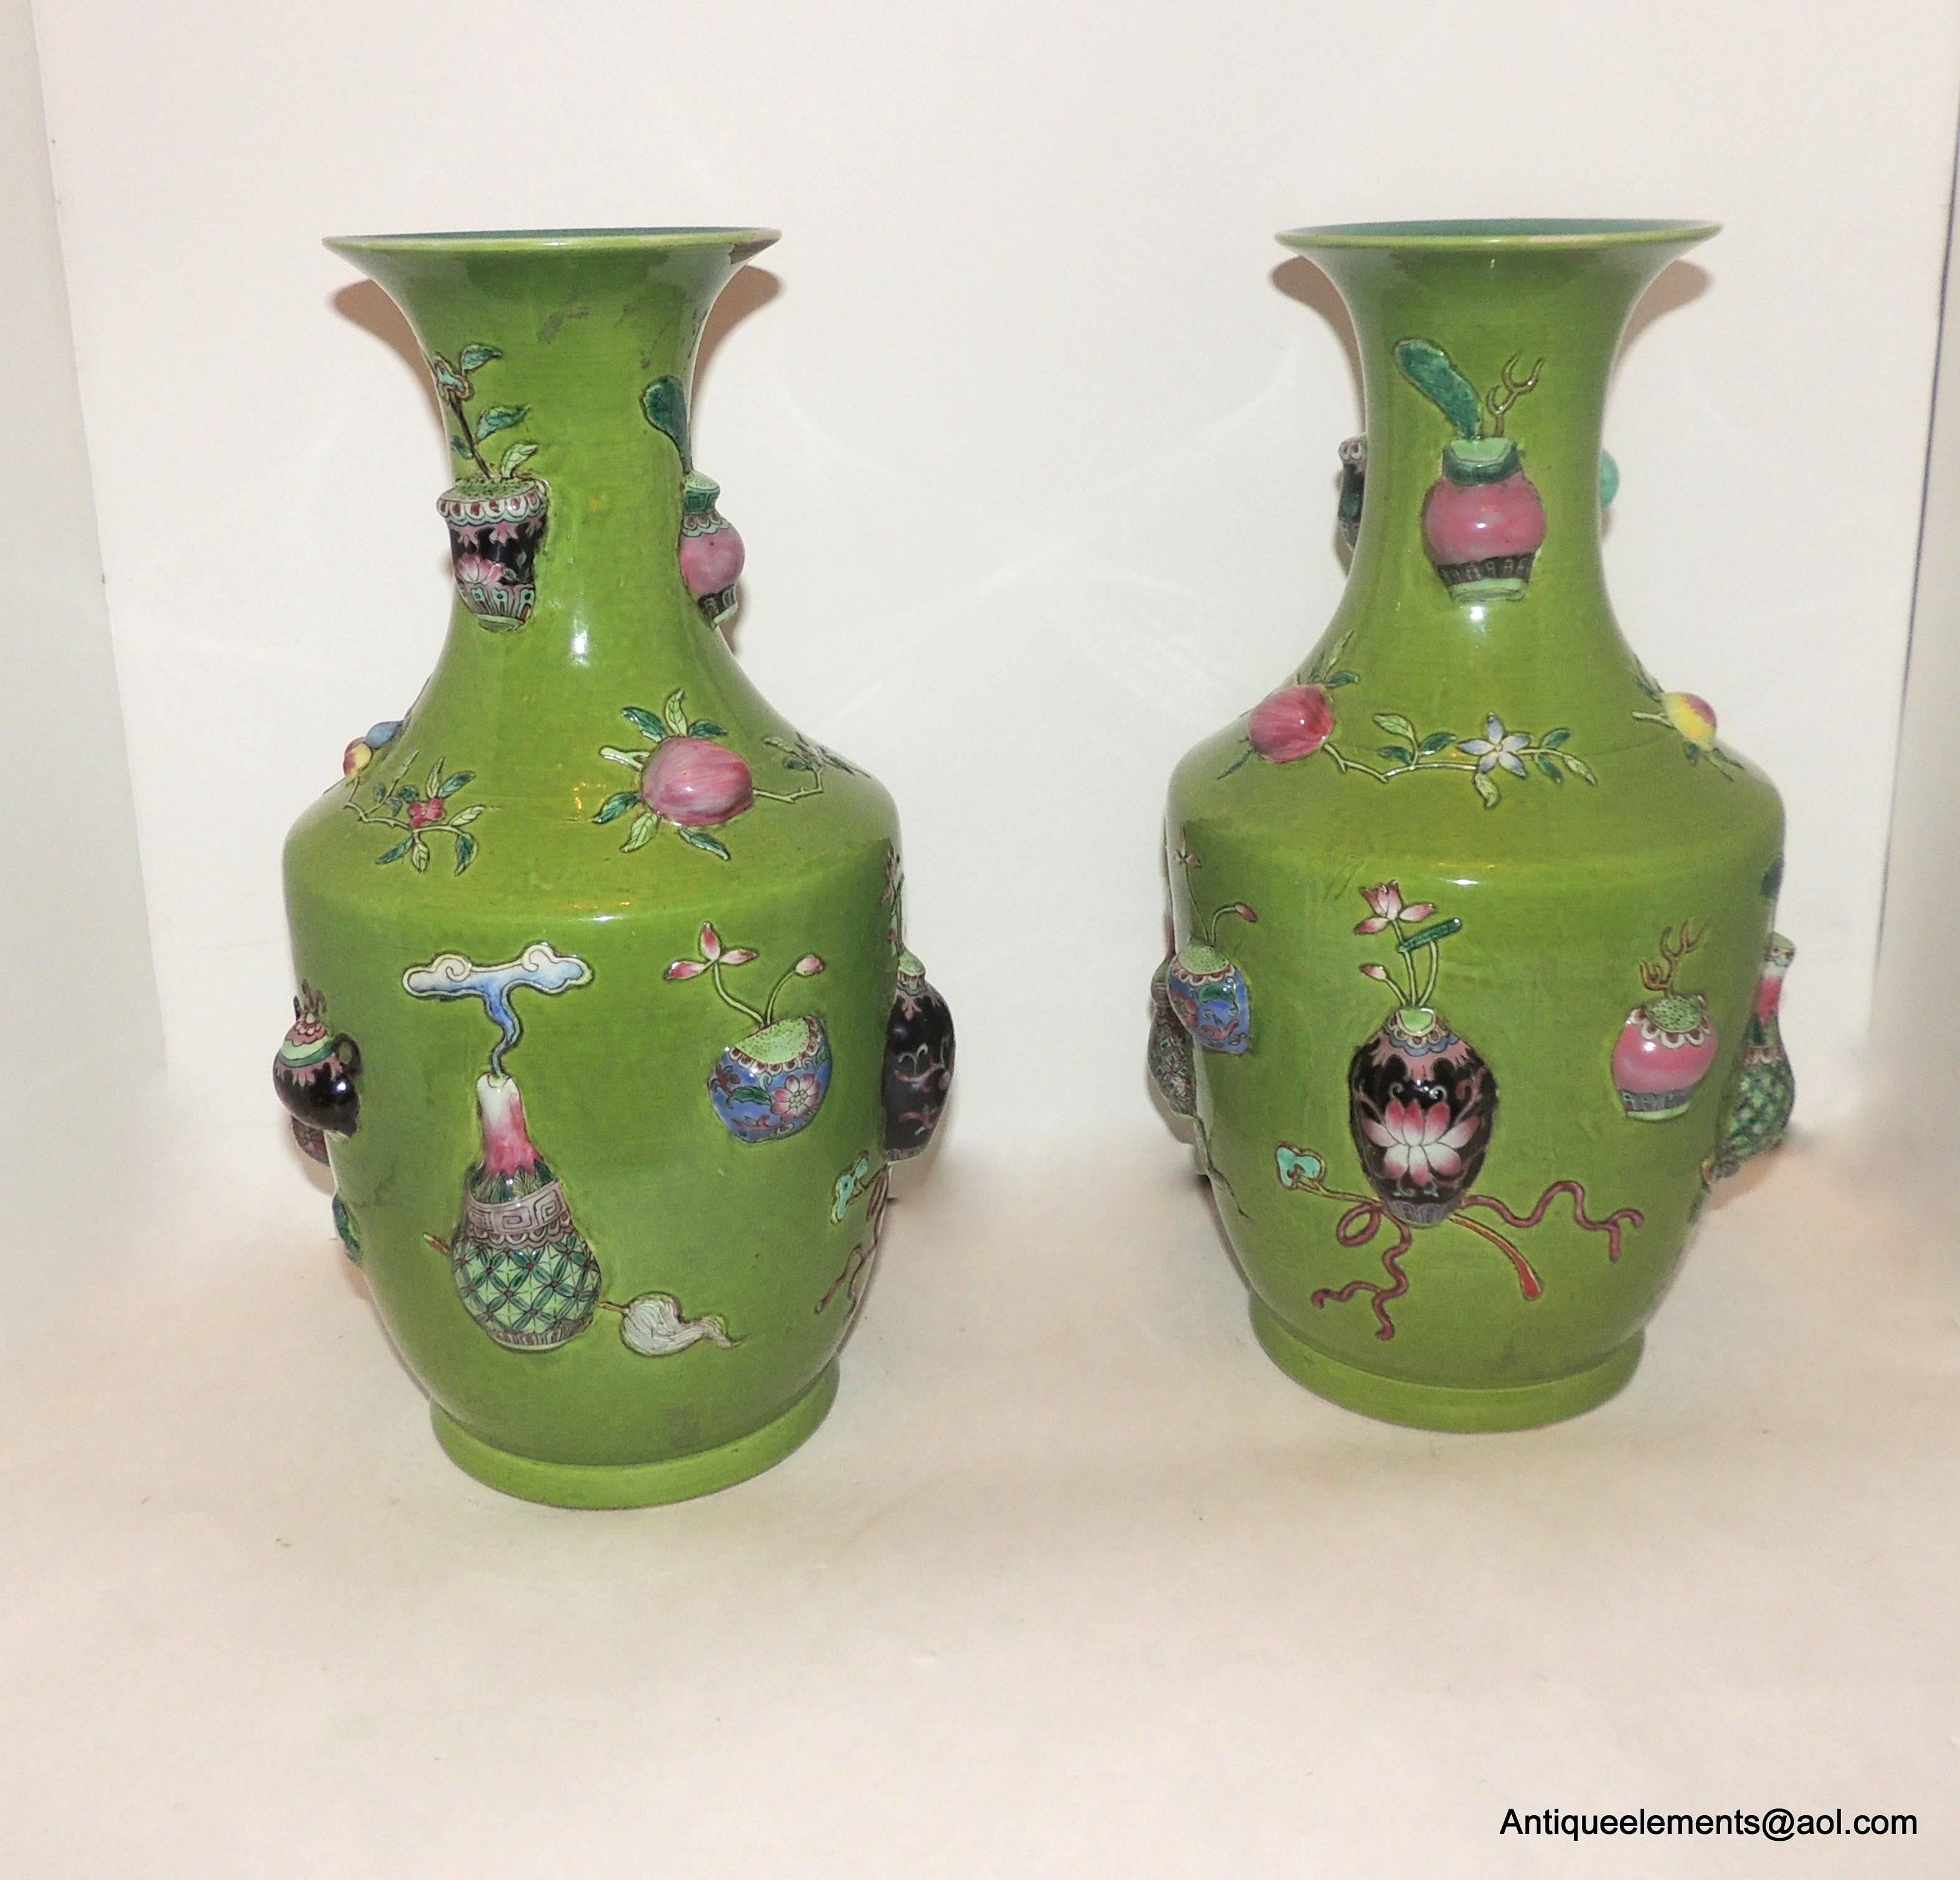 A fine pair of Chinese rotating shaped vases decorated with relief molded precious urn and floral objects in bright shades of magenta, teal green, and pinks on a bright green ground. Each measures 14